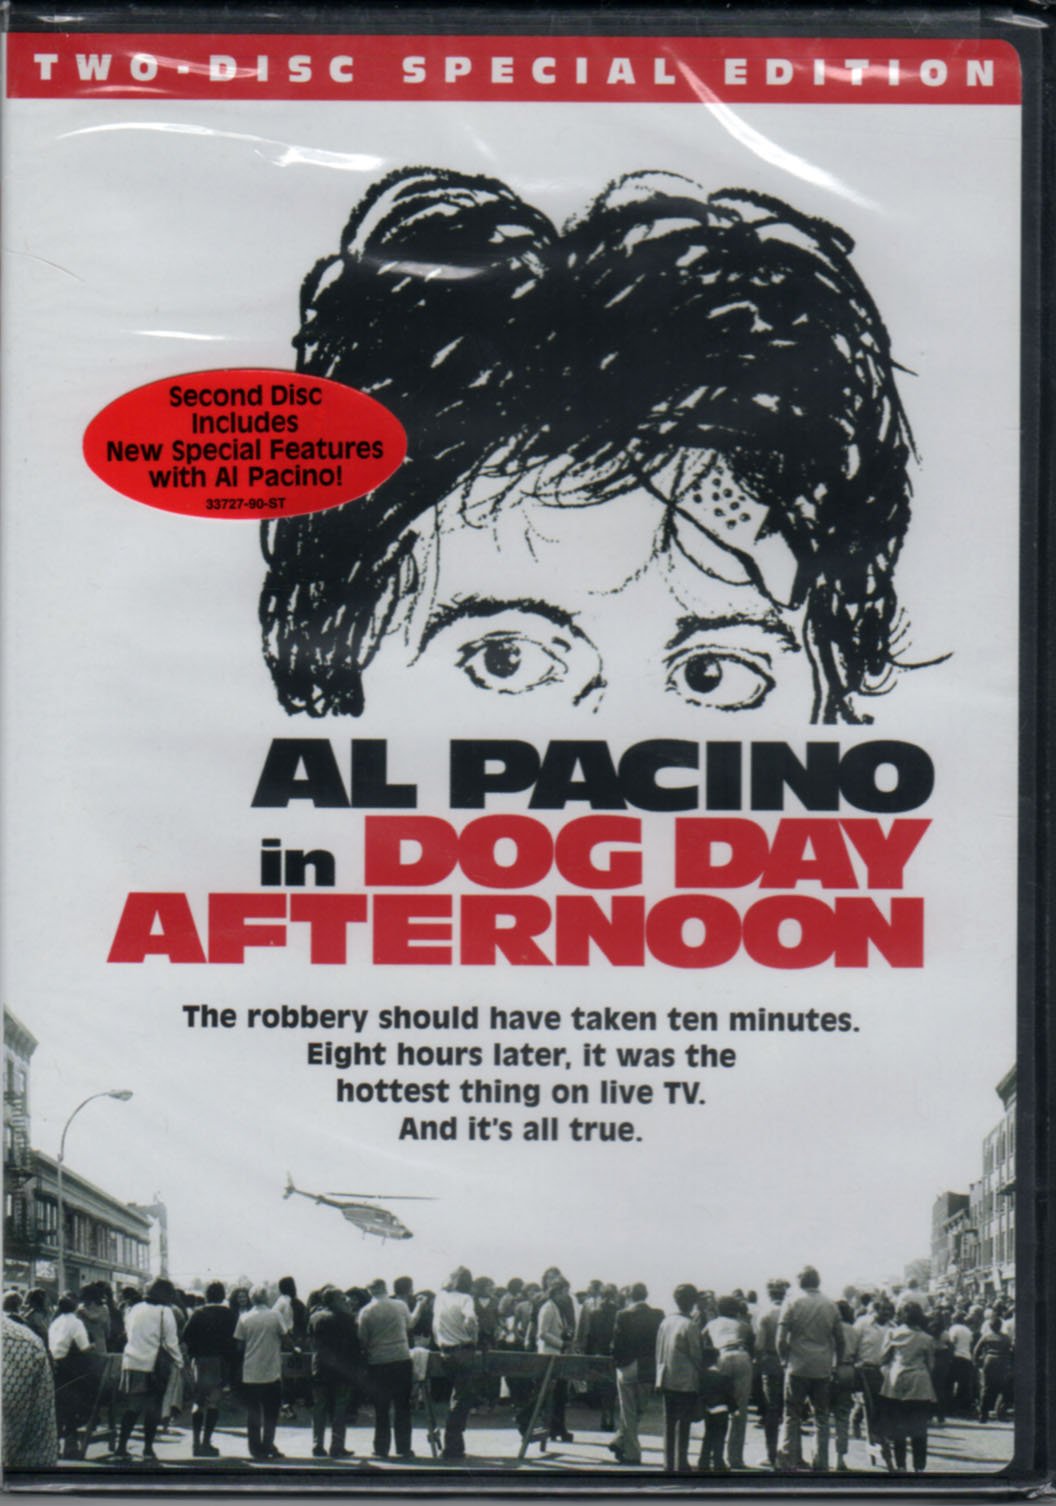 Dog Day Afternoon (Two-Disc Special Edition) on MovieShack